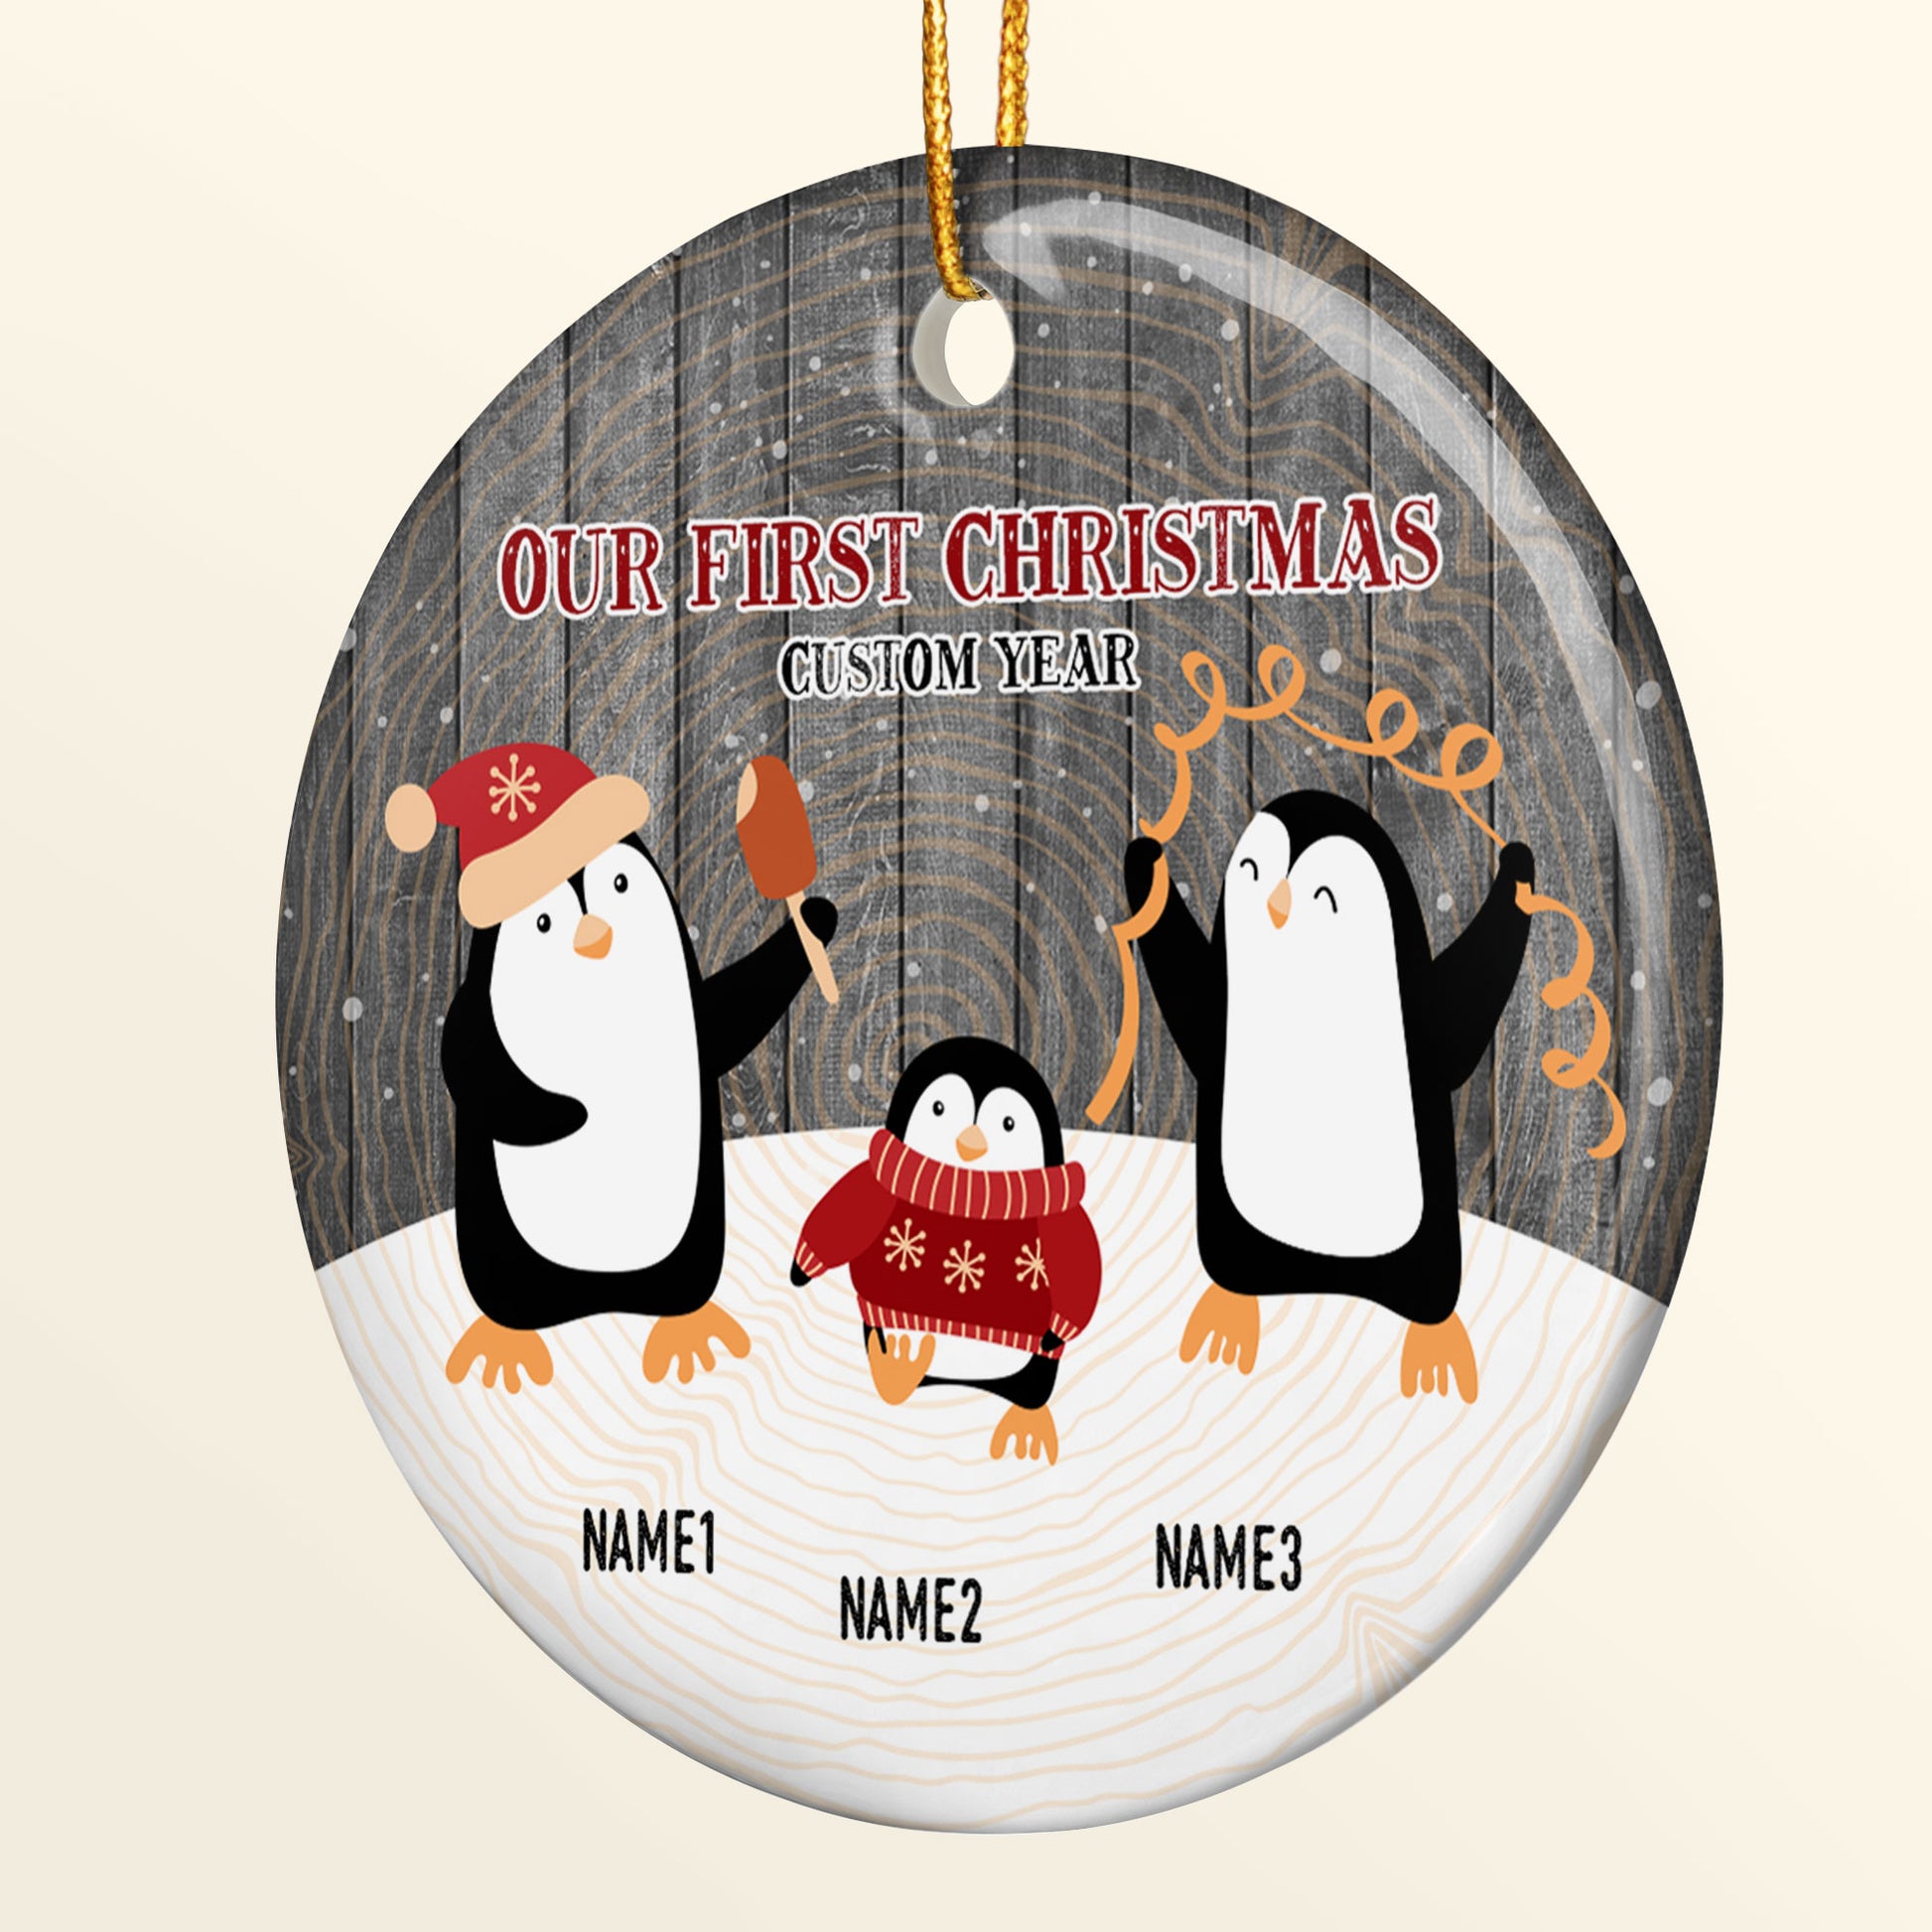 Our 1st Christmas- Personalized Ceramic Ornament - Christmas Gift For Friends And Family